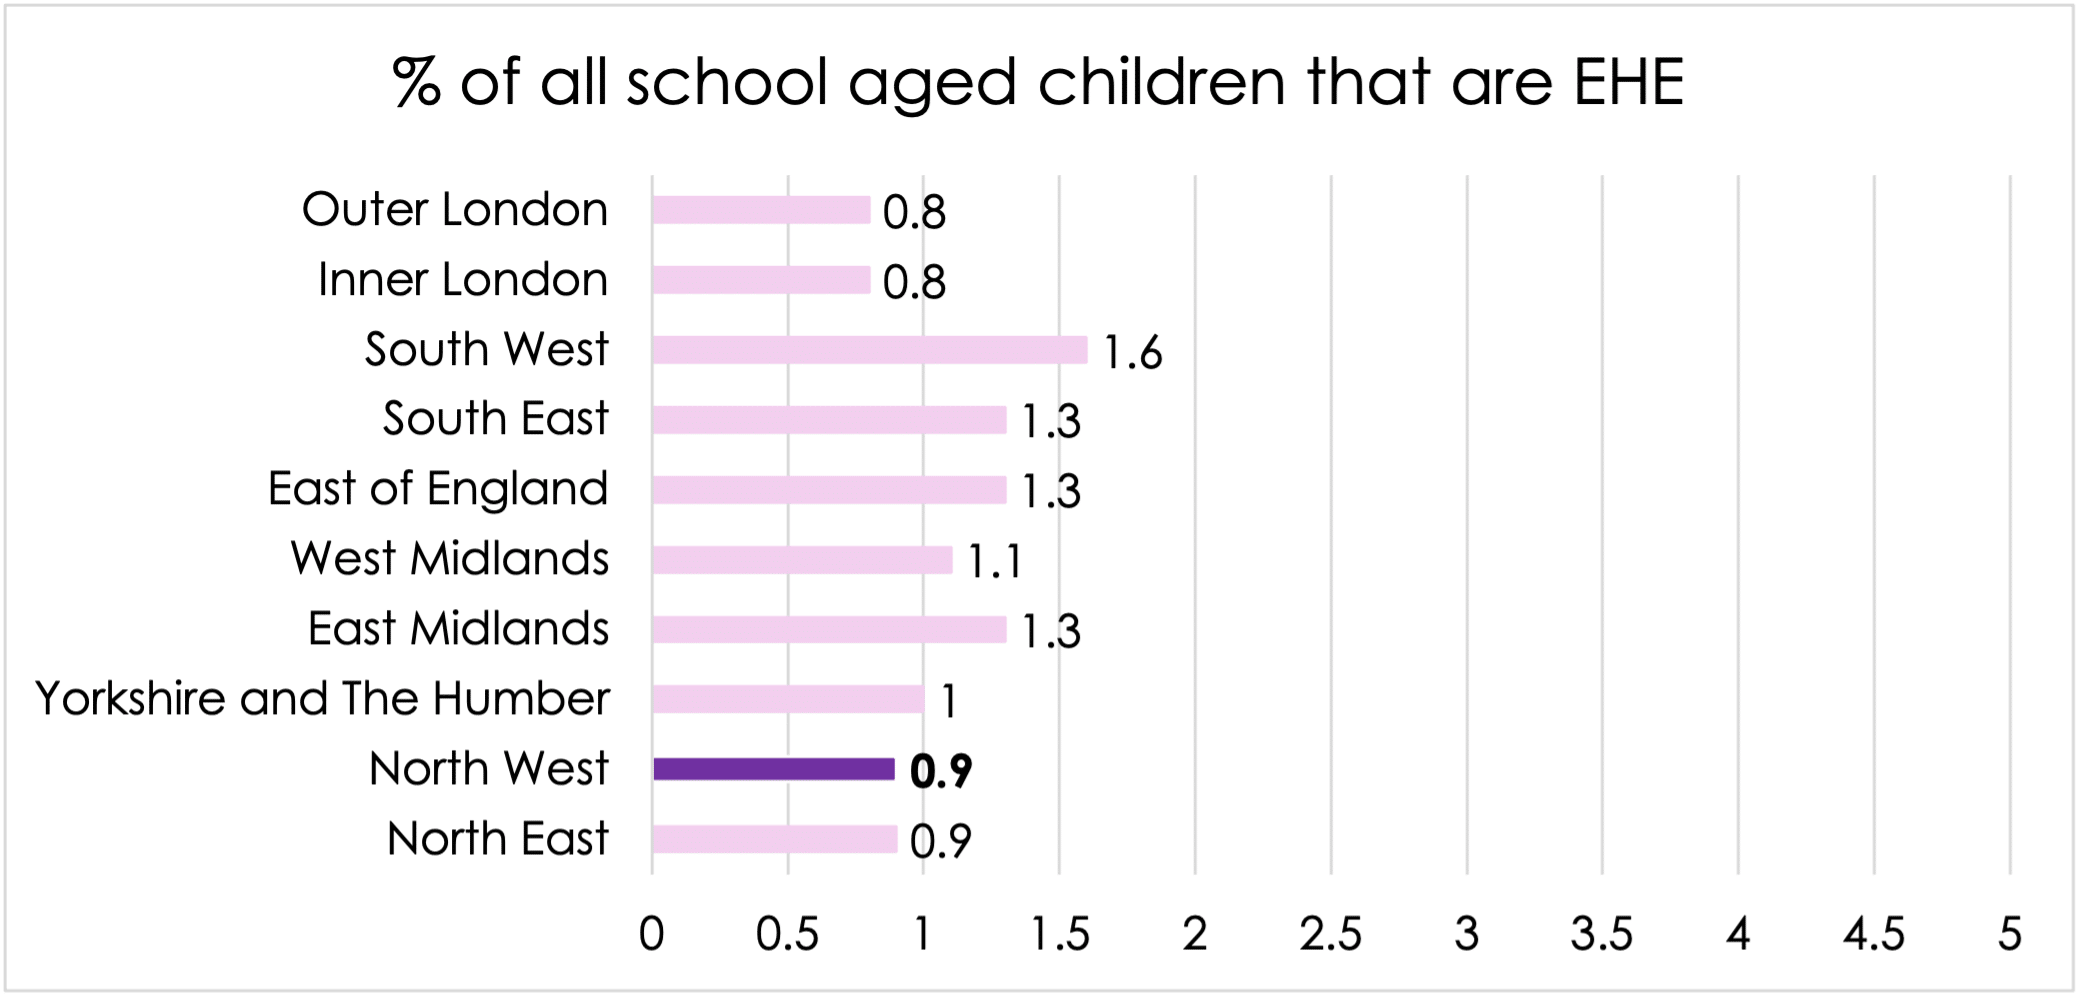 This chart shows the percentage of young people who are being electively home educated. It shows that 0.9% of these are children in the northwest.